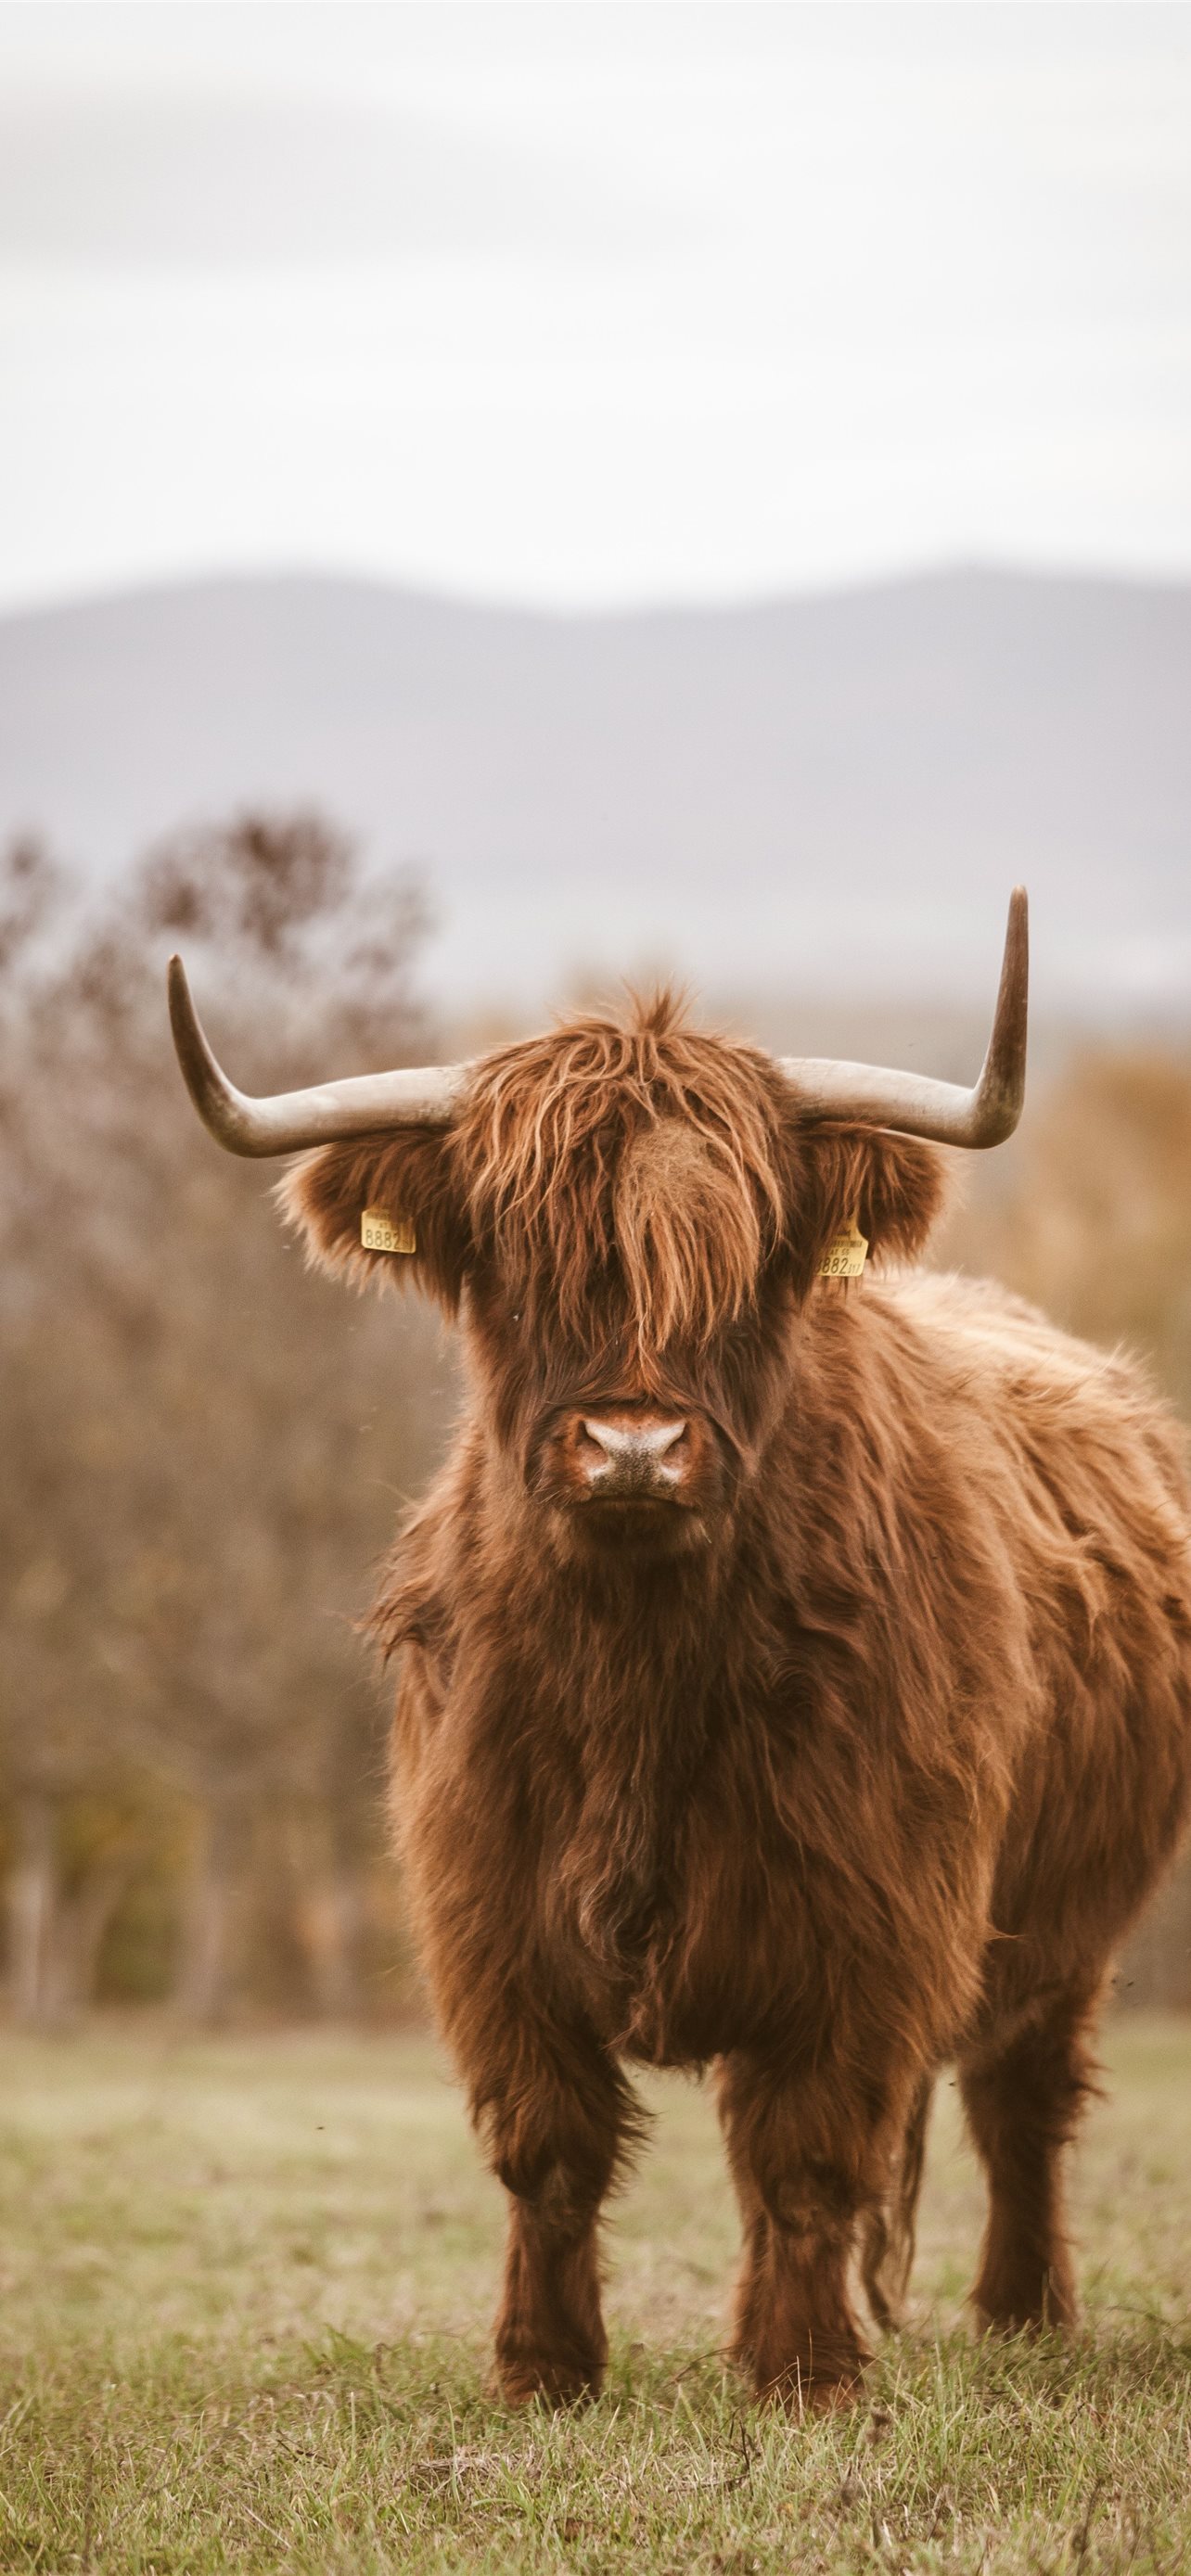 Highland Cattle Photos Download The BEST Free Highland Cattle Stock Photos   HD Images